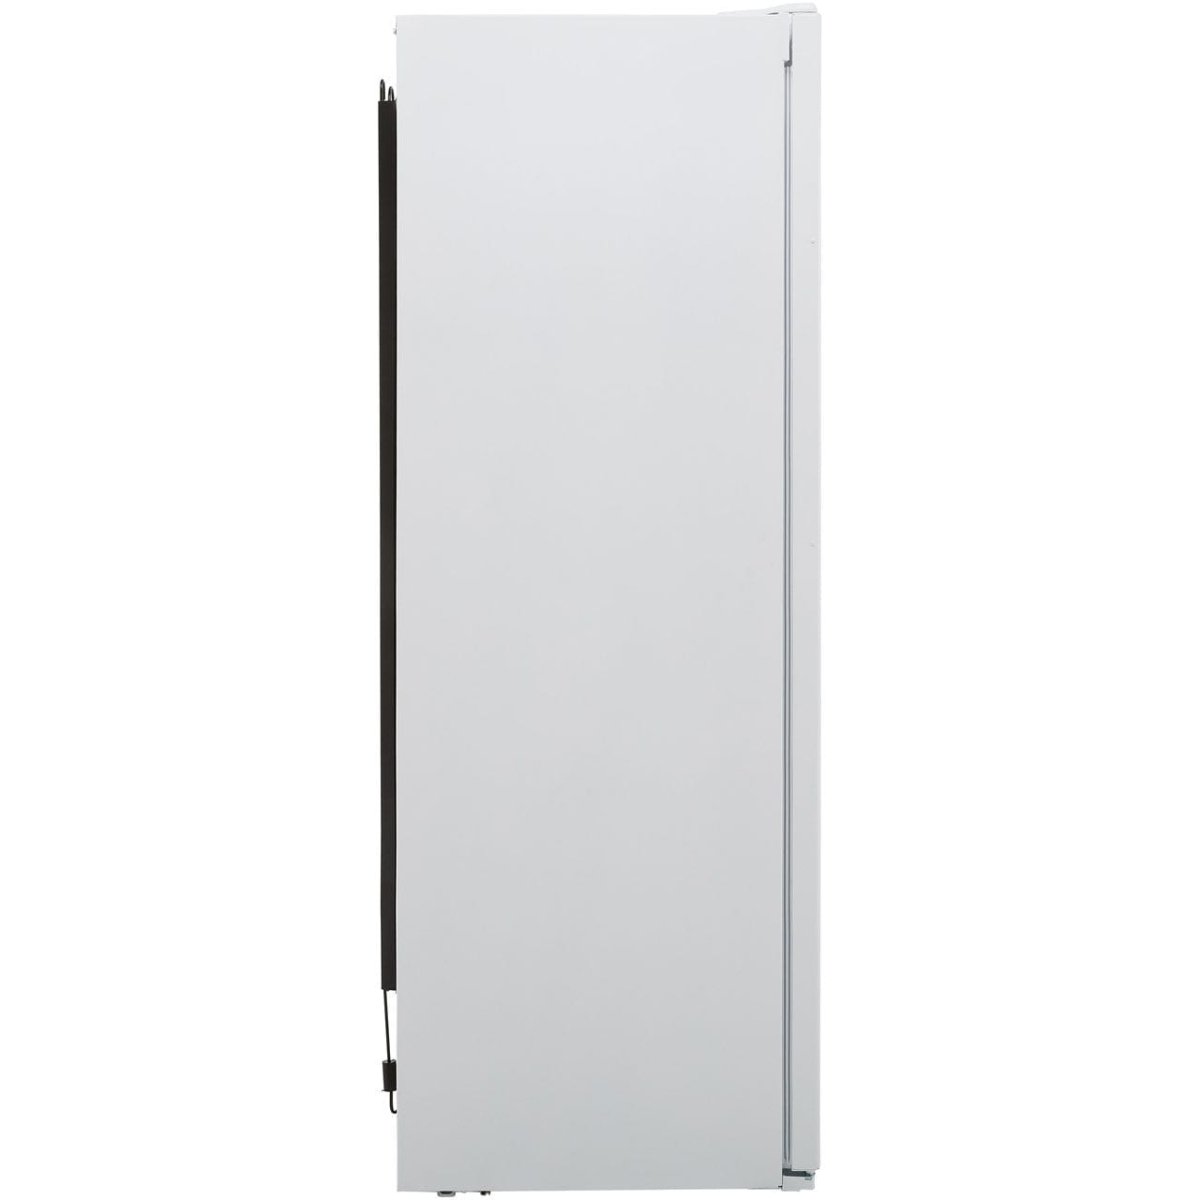 Hotpoint UH6F1CW 222 Litre Freestanding Upright Freezer 167cm Tall Frost Free 60cm Wide - White - Atlantic Electrics